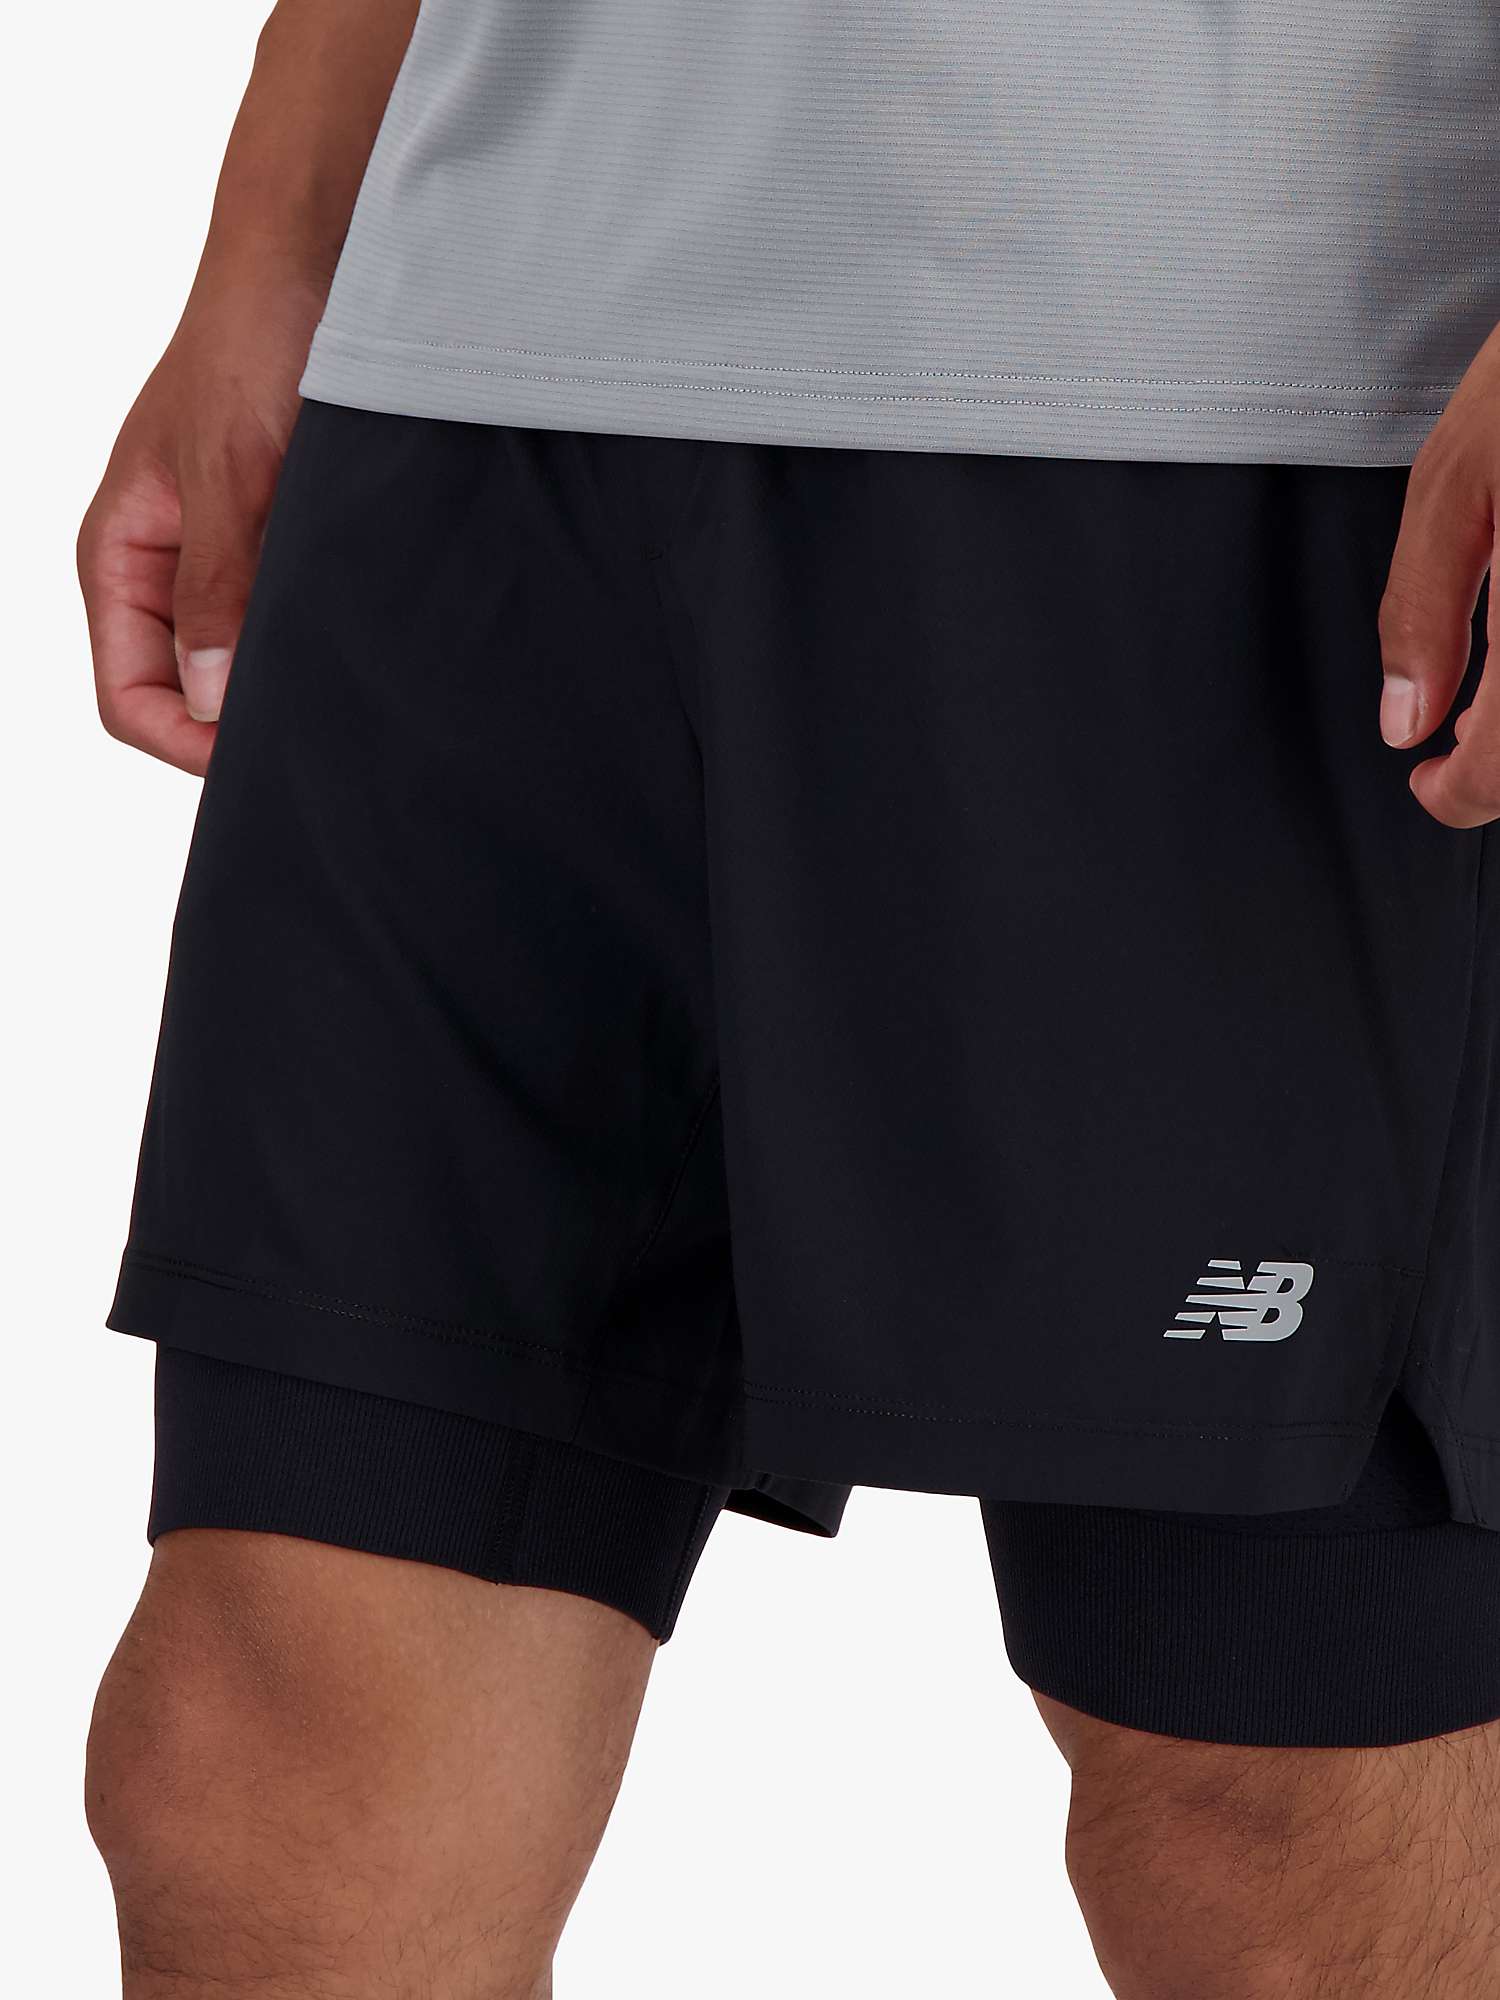 Buy New Balance Seamless 2-in-1 Shorts, Black Online at johnlewis.com